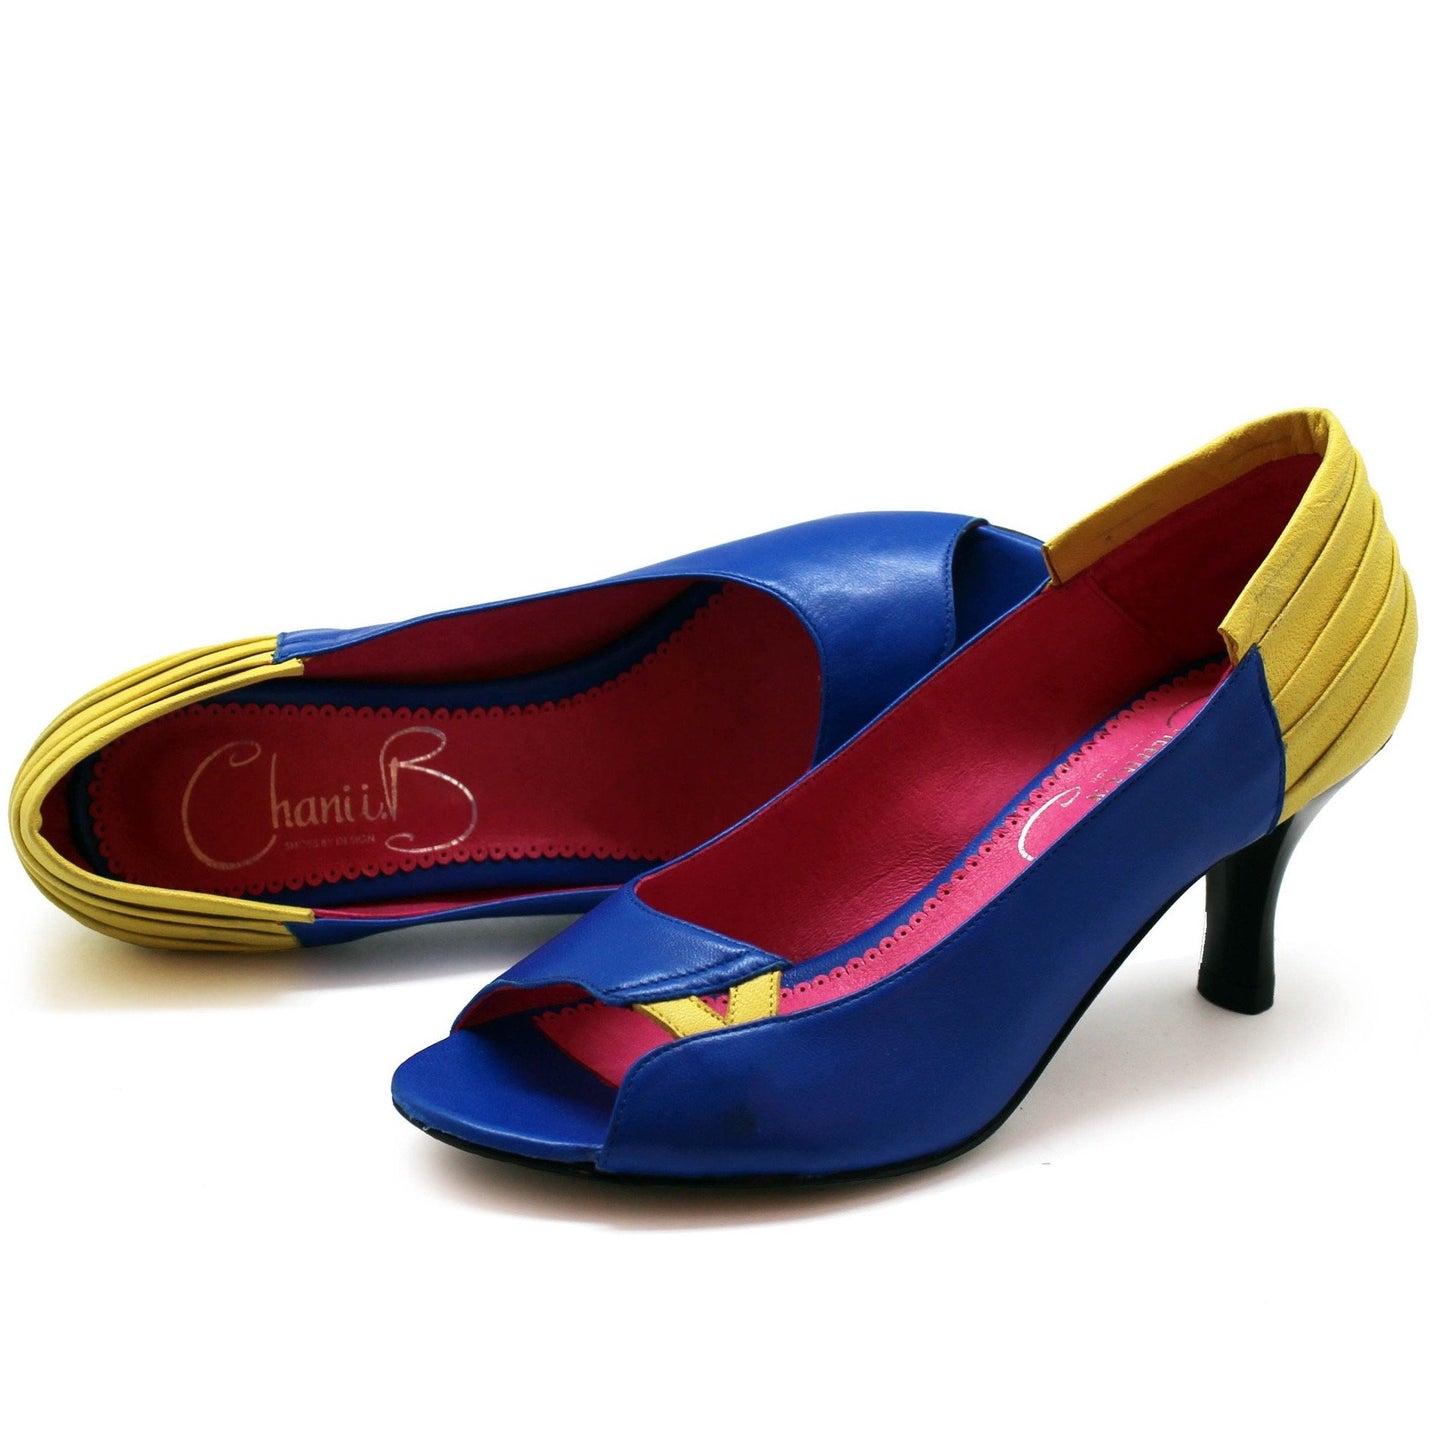 Fashion - Blue/Yellow- Last pairs 37 and 39